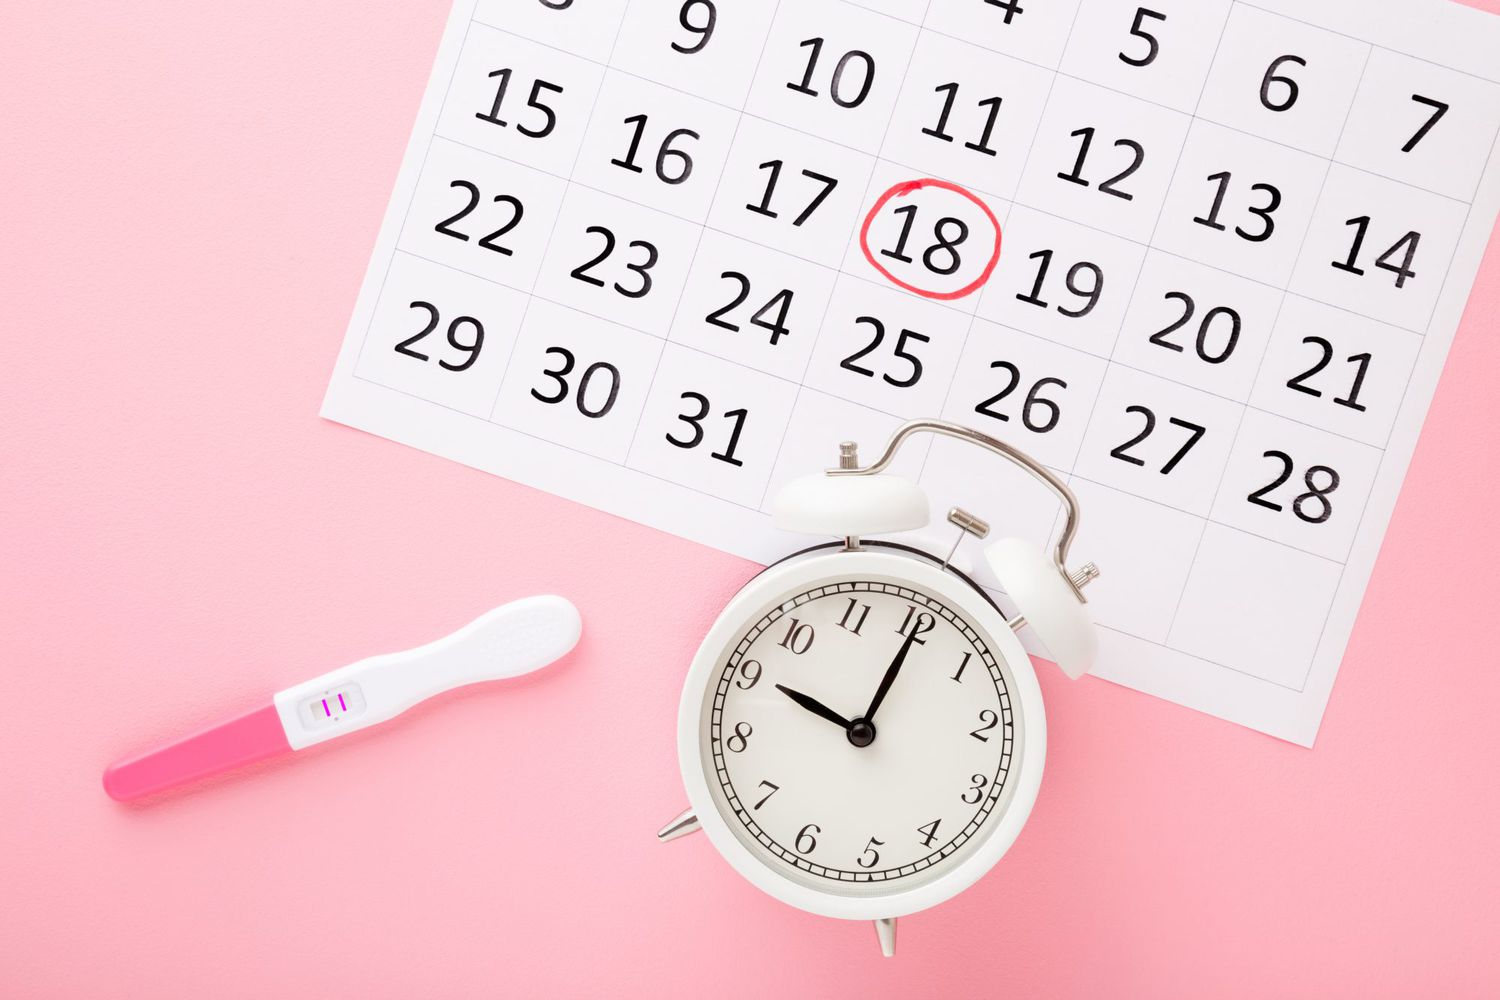 An image of a pregnancy test, calendar, and alarm clock on a pastel pink background.